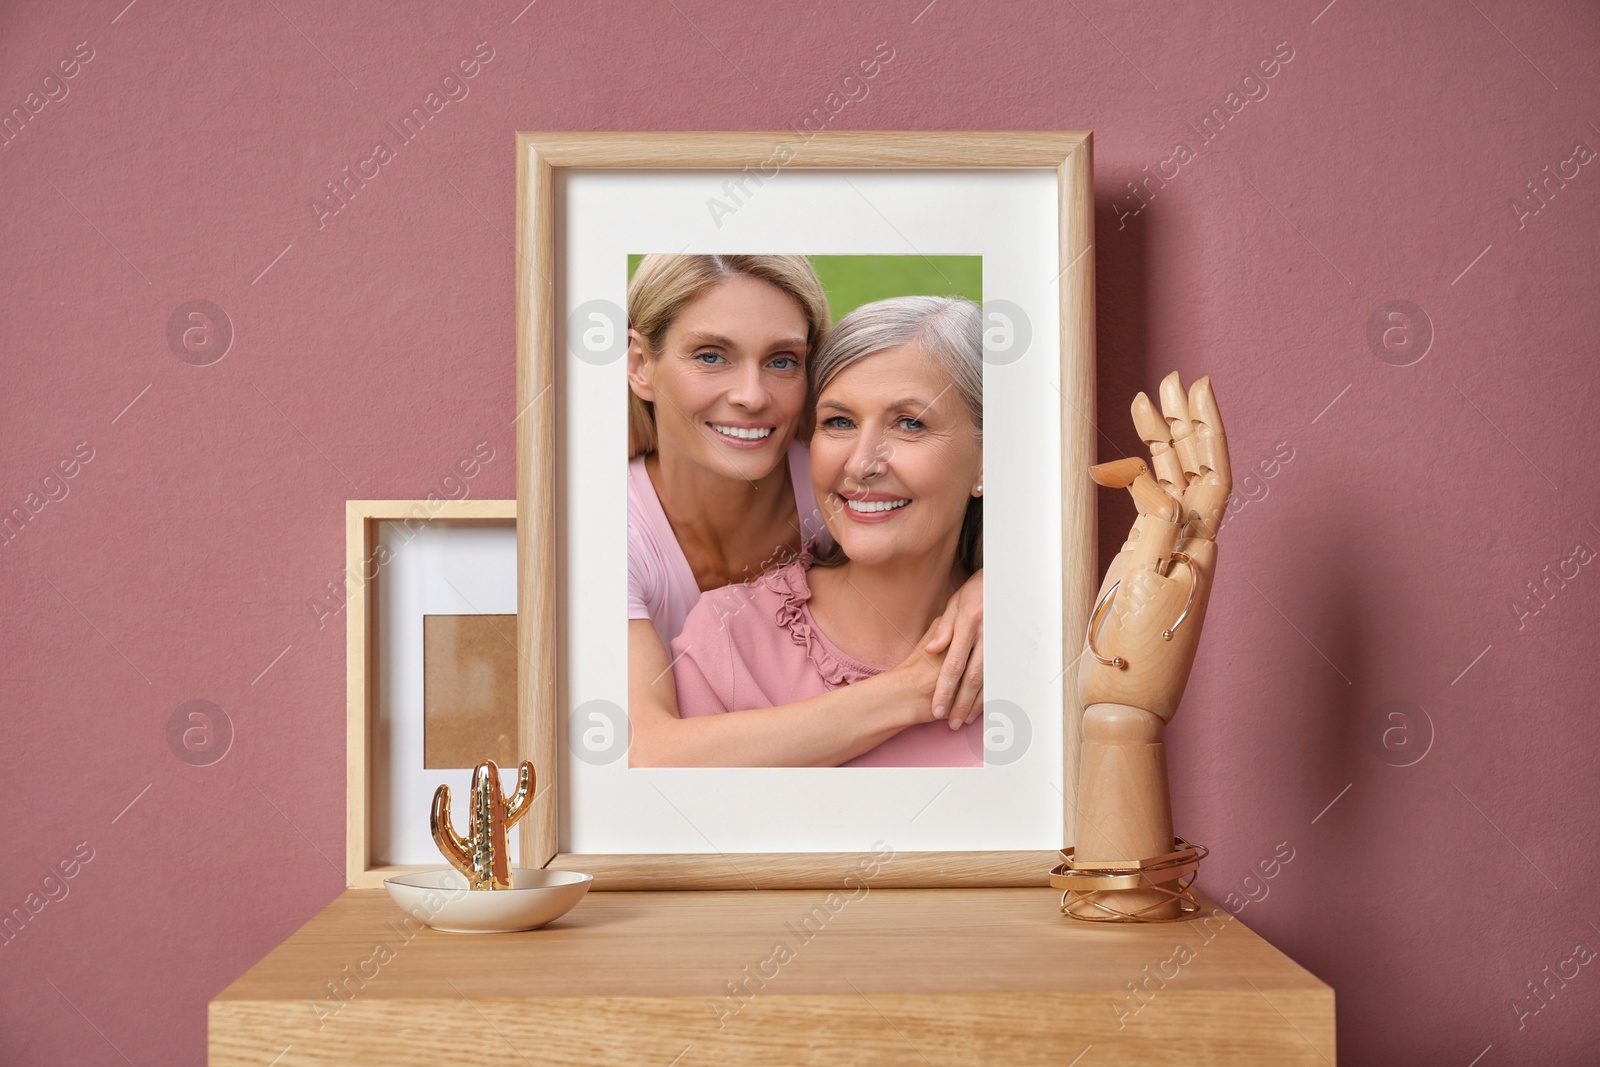 Image of Family portrait of mother and daughter in photo frame on table near color wall